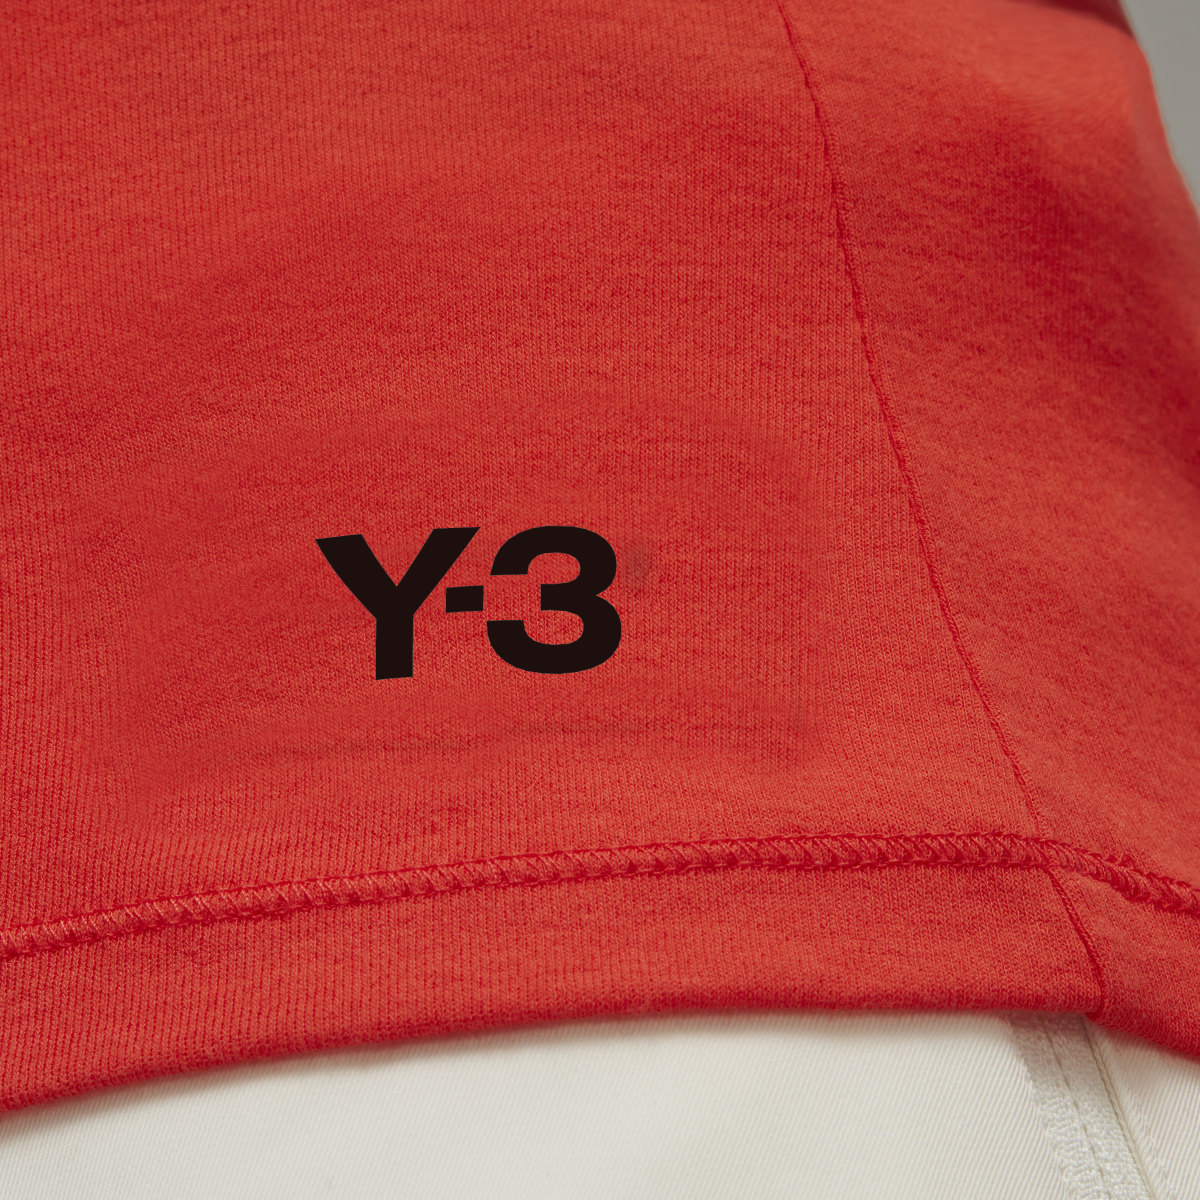 Adidas Y-3 Fitted Short Sleeve Tee. 7